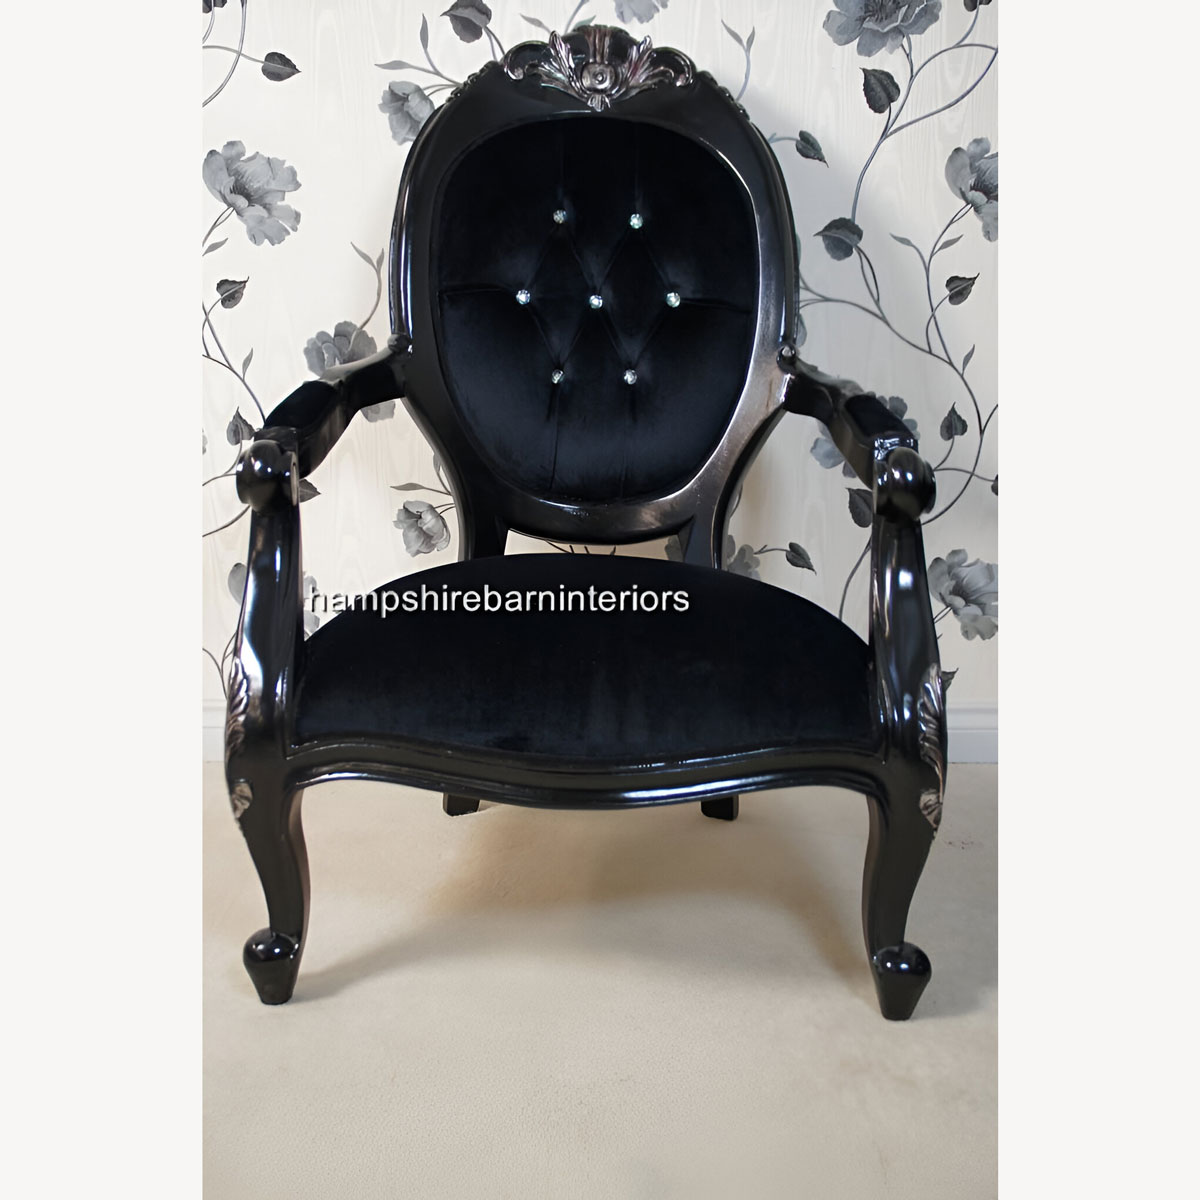 Chatsworth Arm Throne Chair In Silvered Black Finish With Crystal Buttons And Black Velvet 1 - Hampshire Barn Interiors - Chatsworth Arm Throne Chair In Silvered Black Finish With Crystal Buttons And Black Velvet -